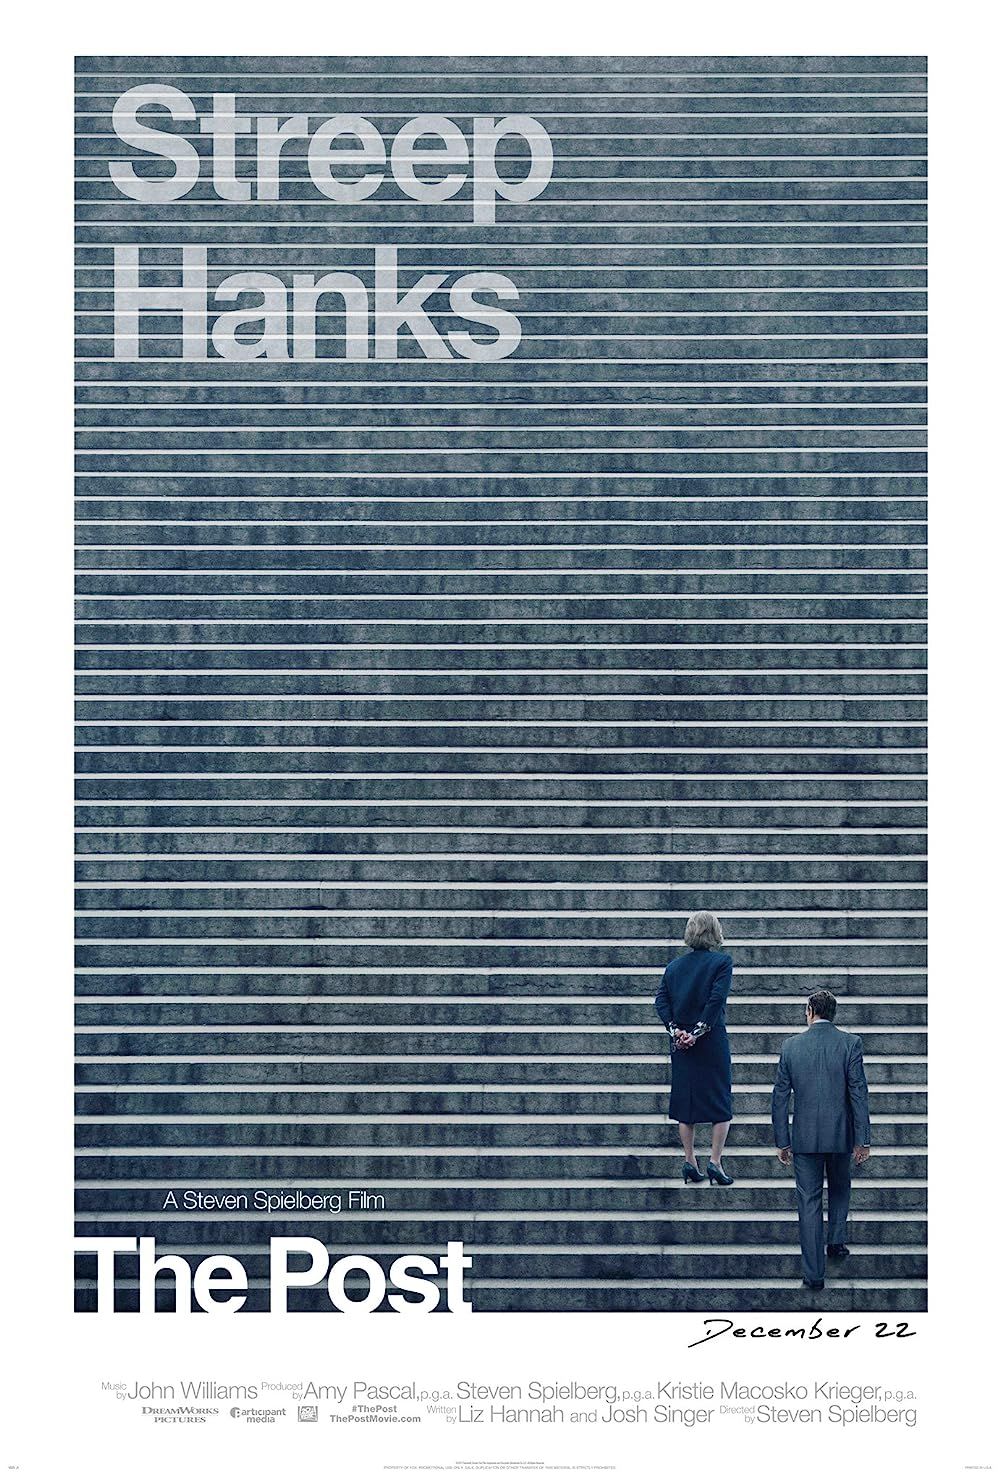 Meryl Streep and Tom Hanks on the Poster for The Post